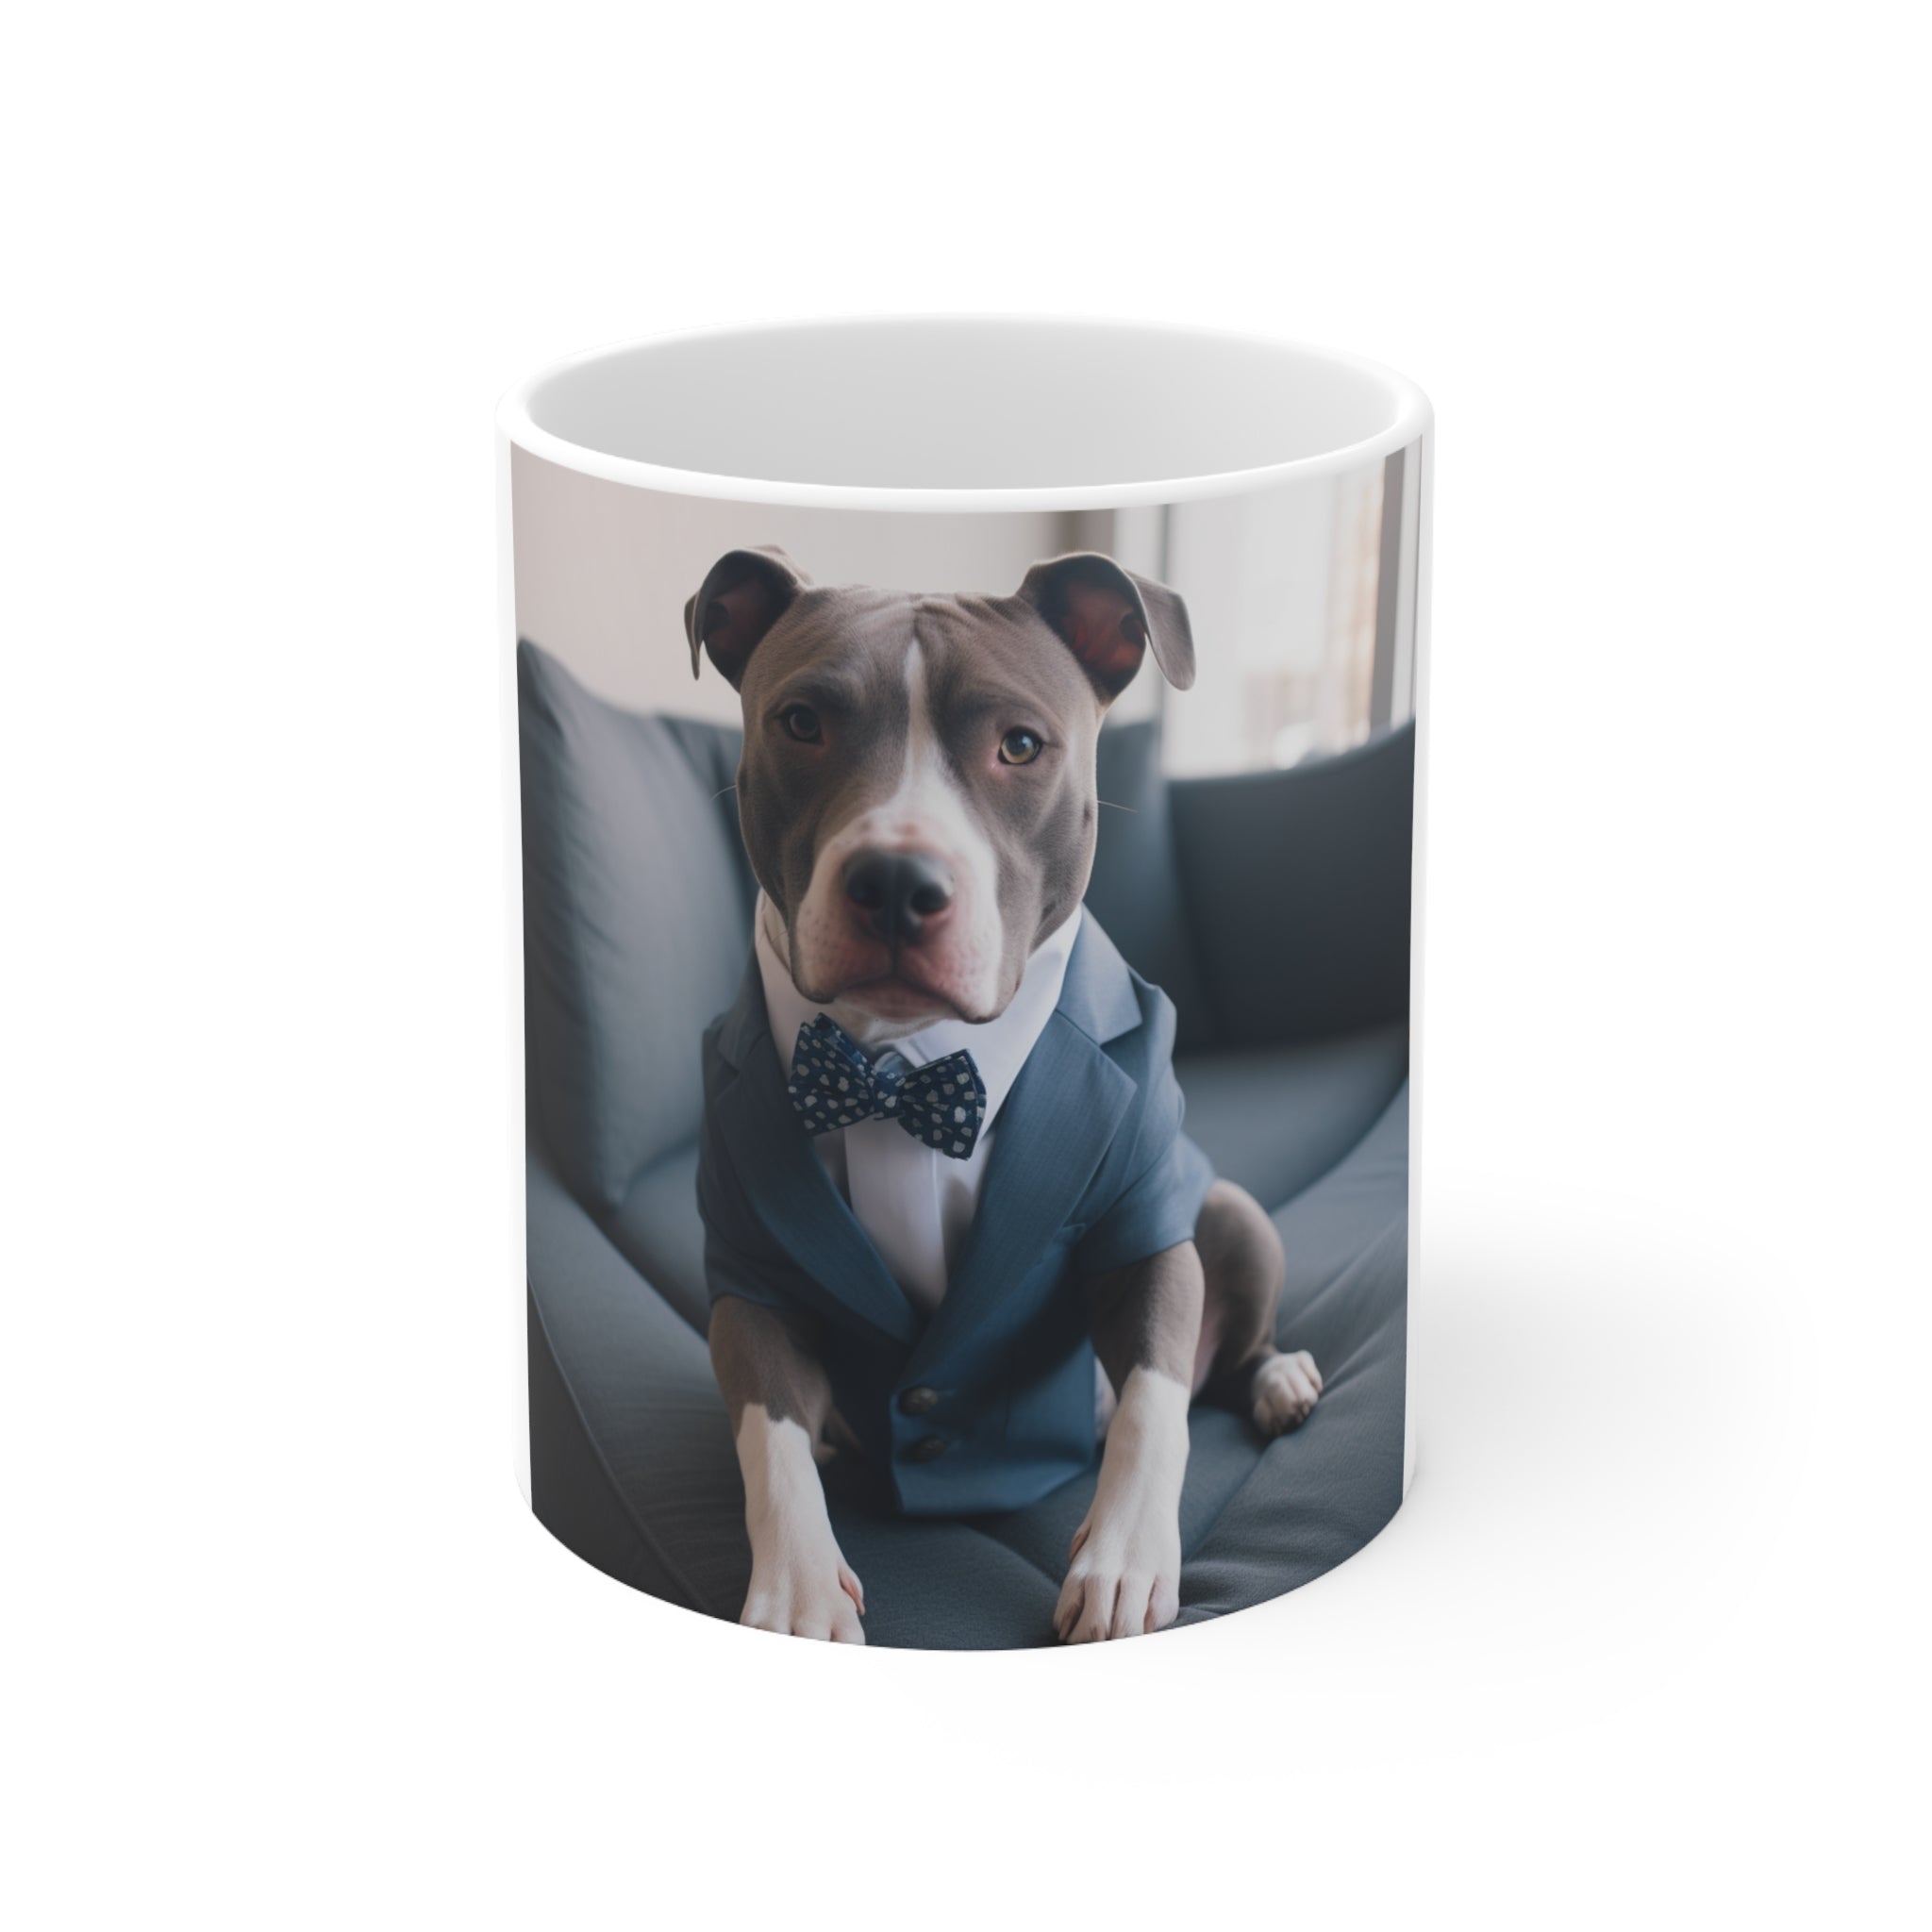 Funny Dog Interview Coffee Cup Gift "Do I have the Job?" Cute Puppy in Interview Attire Ceramic Mug 11oz Gift for Coffee Drinkers and Coffee Lovers